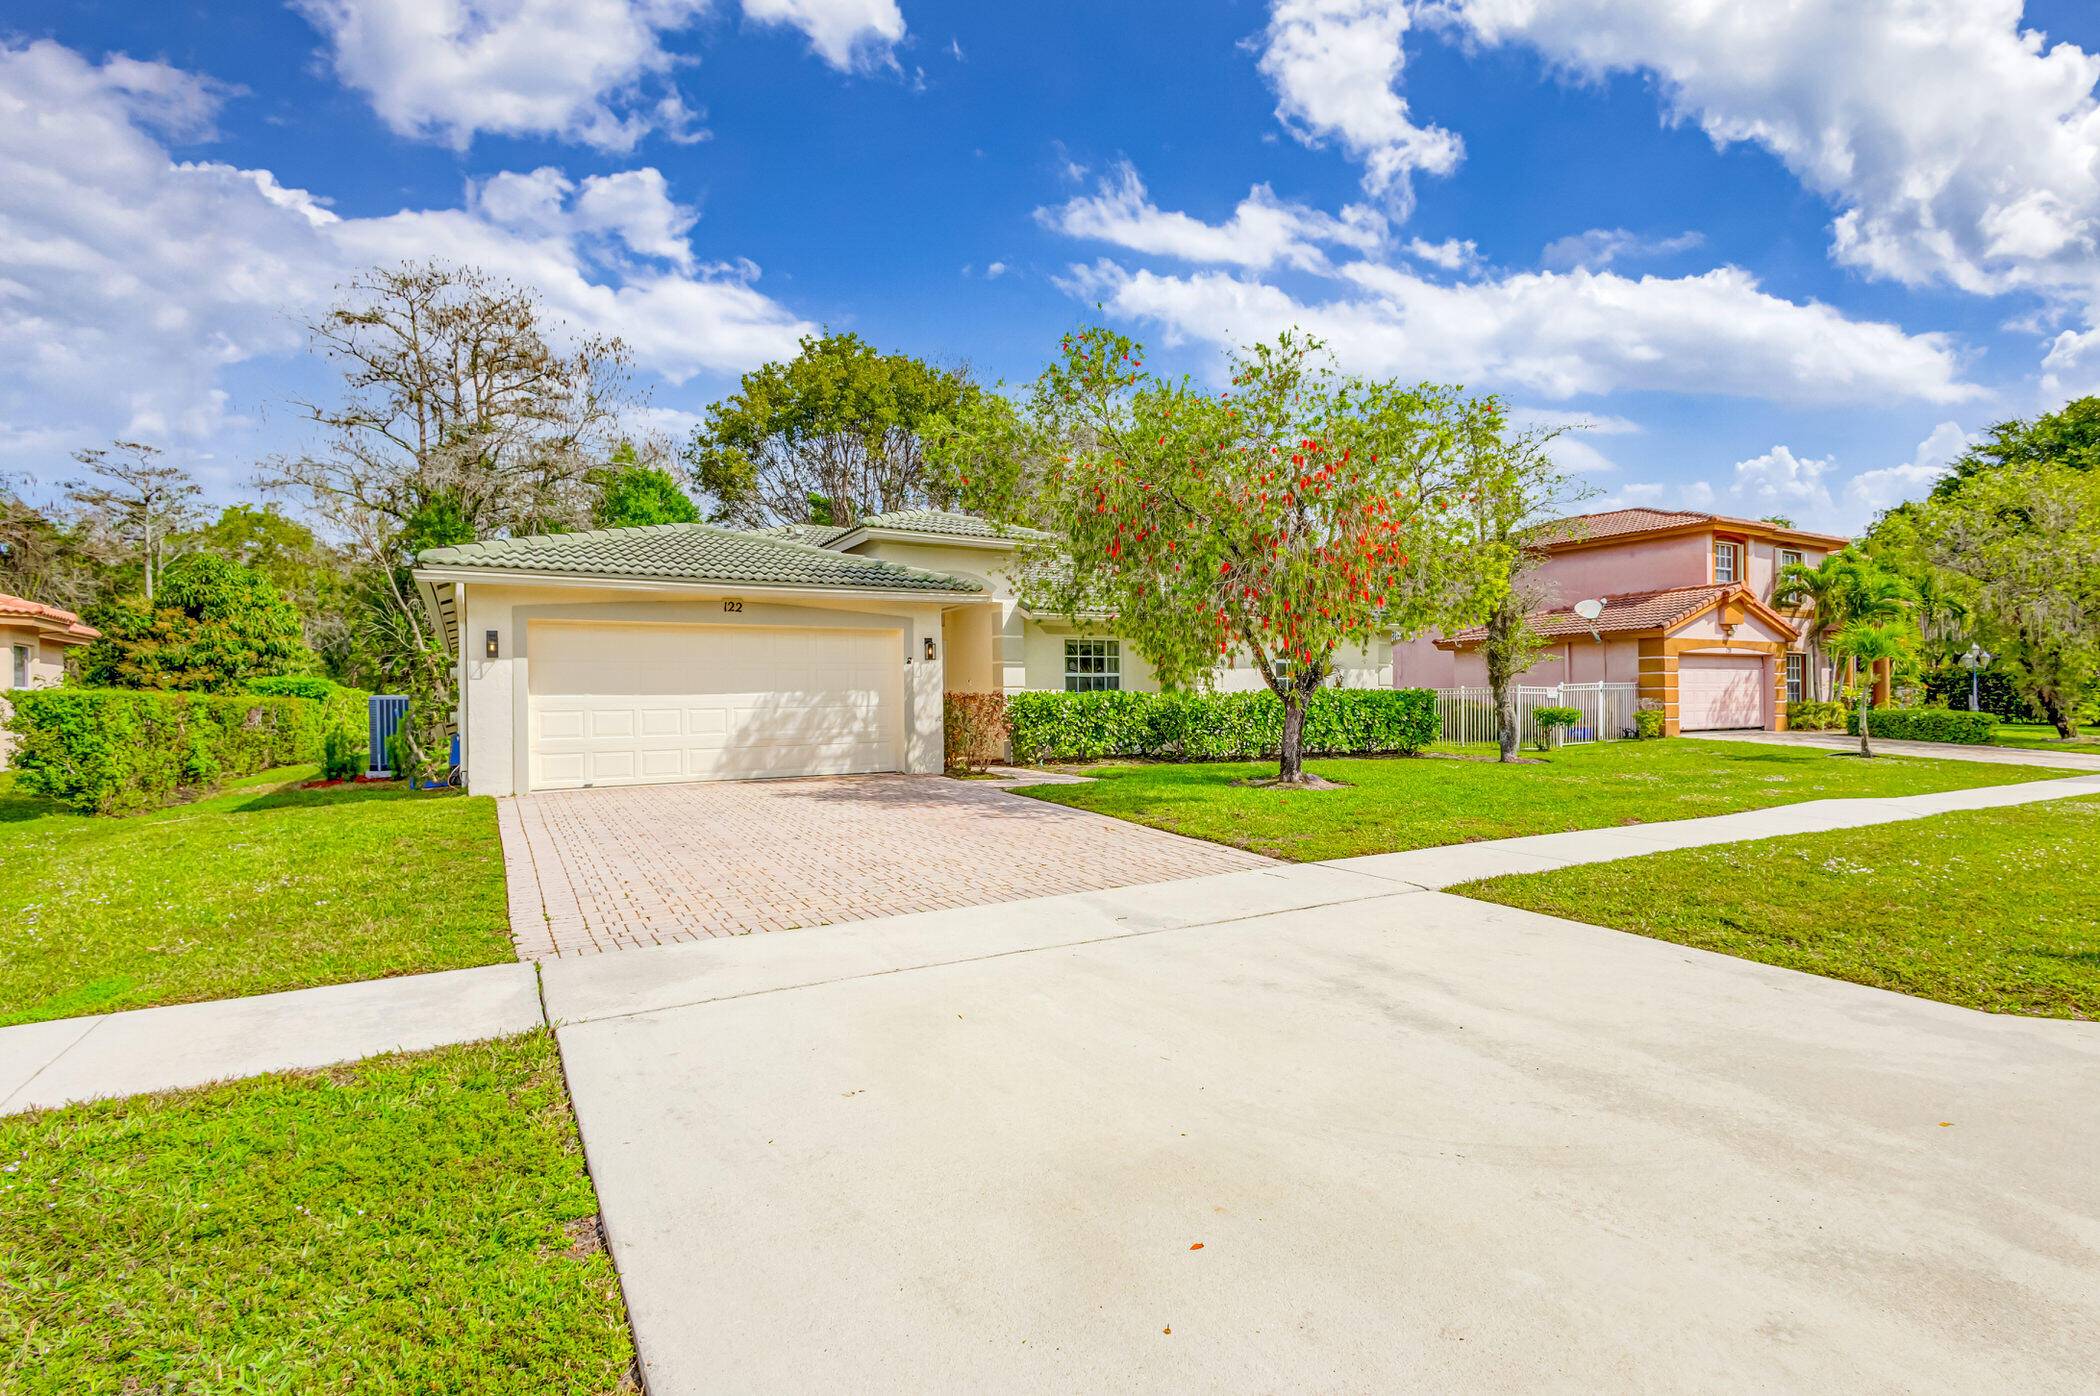 Welcome to 122 Chestnut Circle, Royal Palm Beach an exquisite single family retreat nestled in a tranquil community with a modest 30 monthly HOA fee.